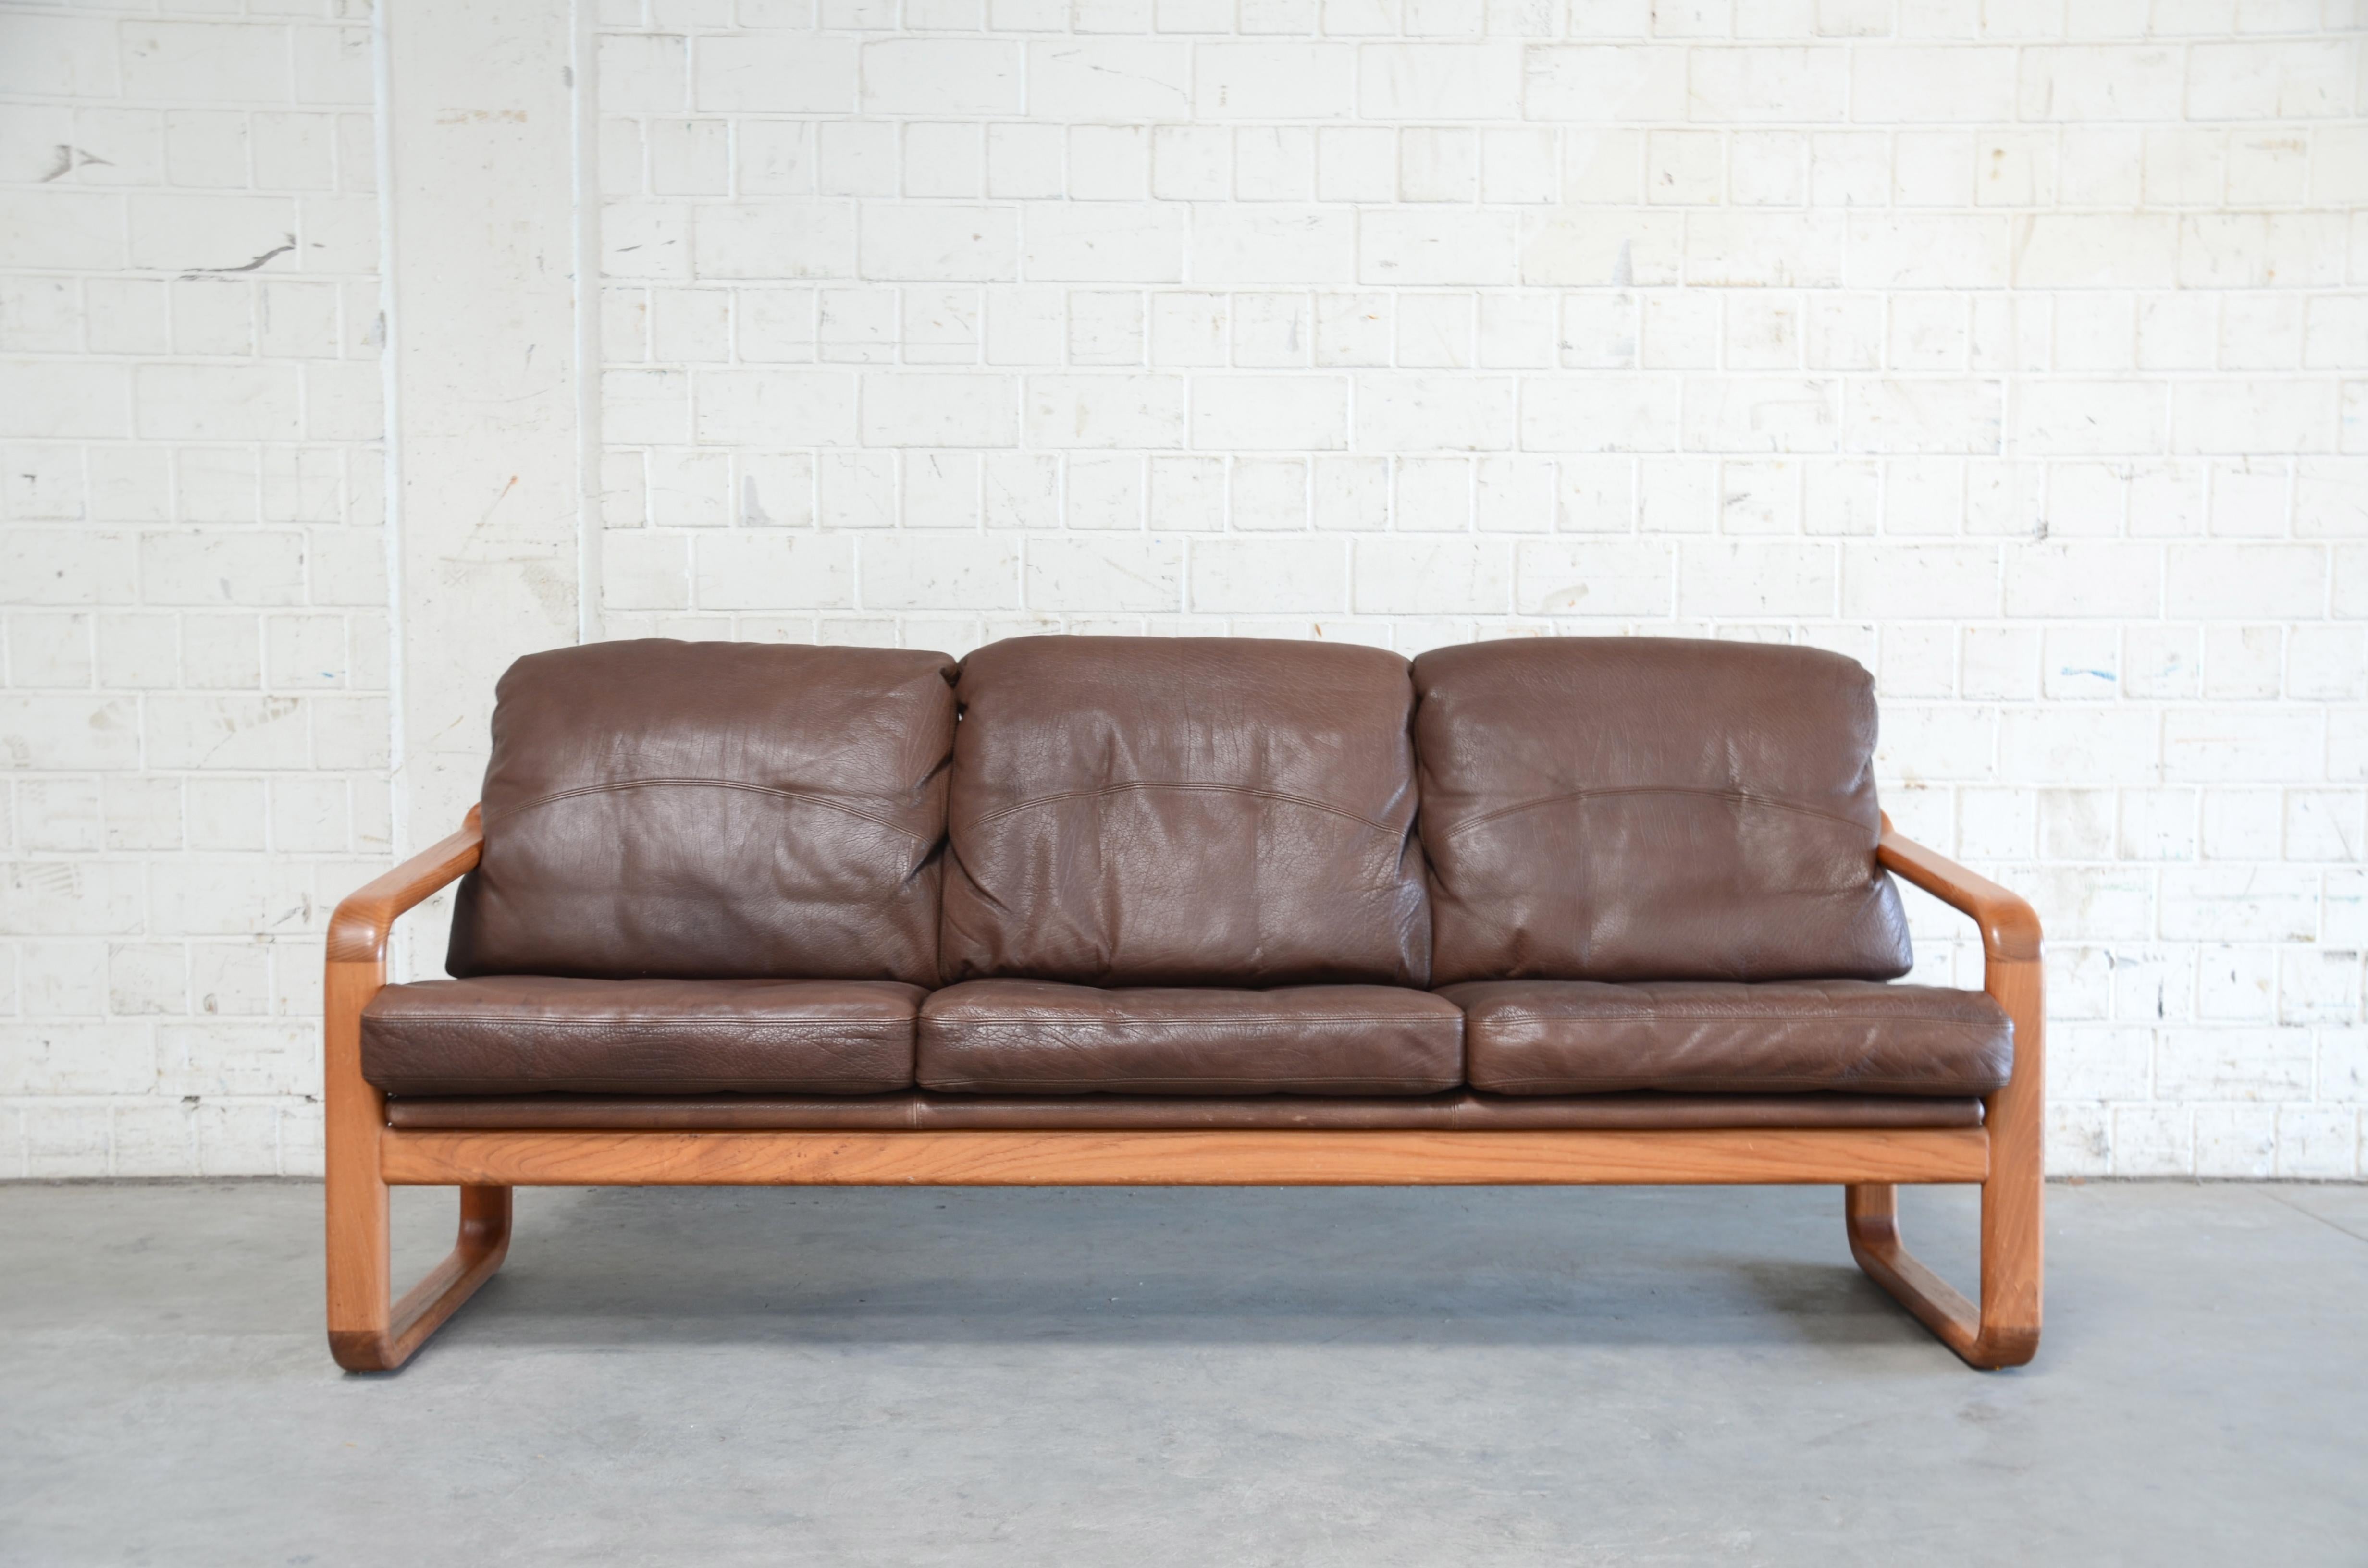 Danish leather sofa from Holstebro Mobelfabrik.
Thick brown aniline leather and solid teak frame.